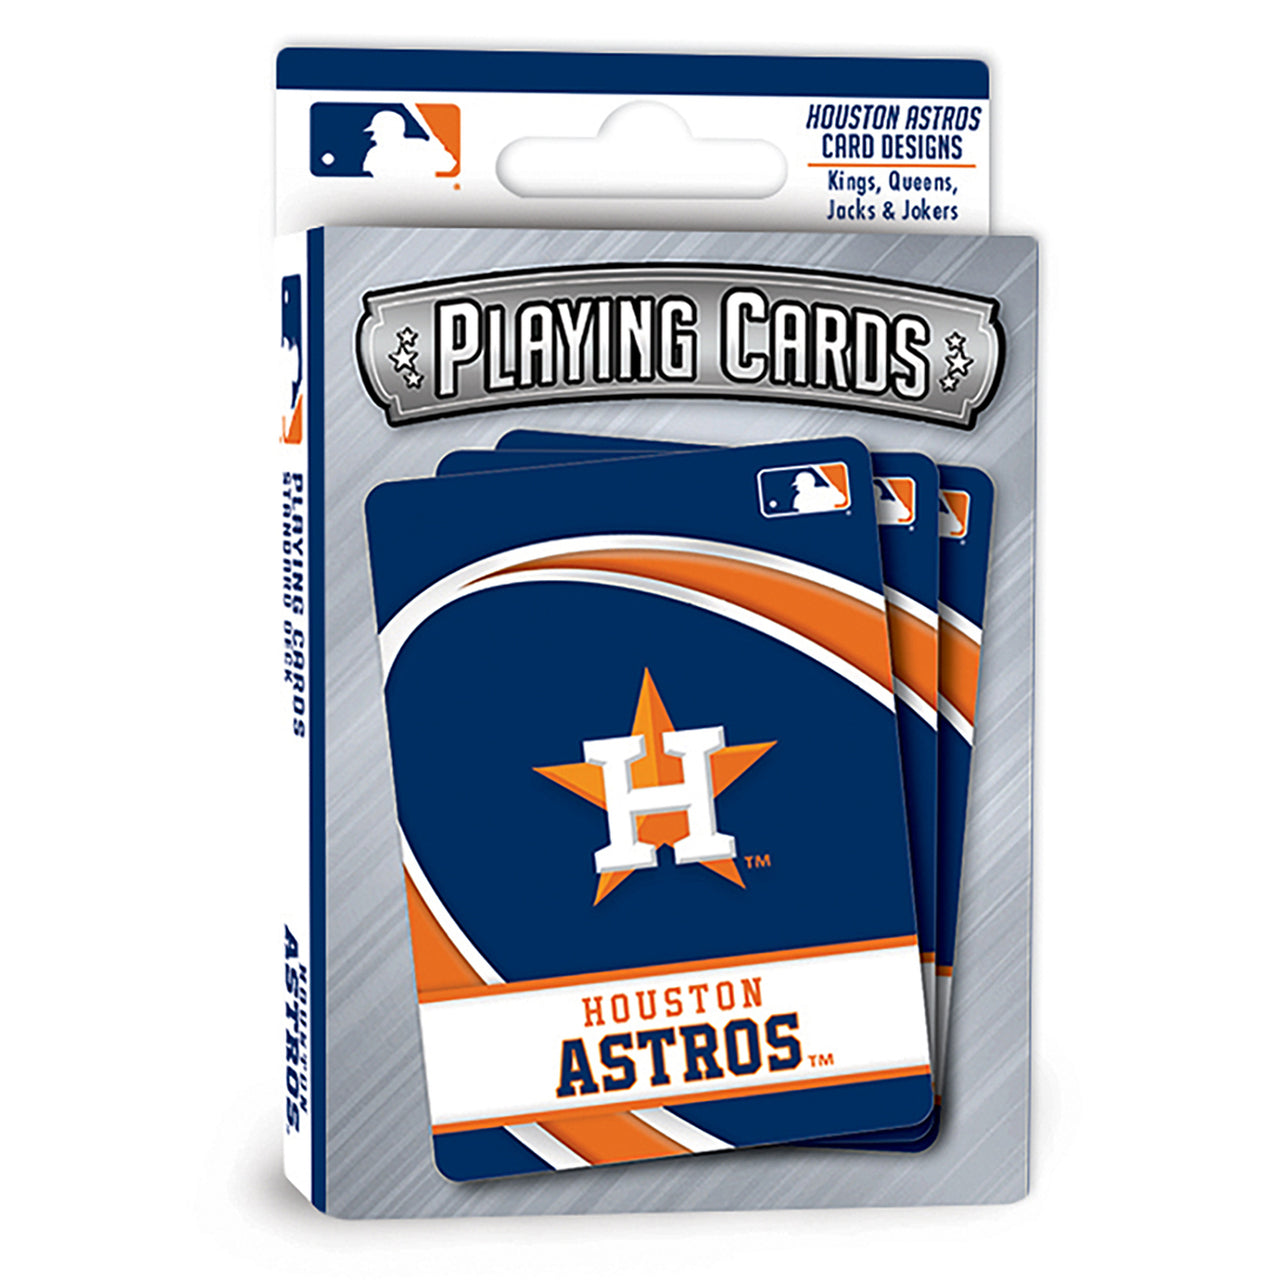 HOUSTON ASTROS PLAYING CARDS